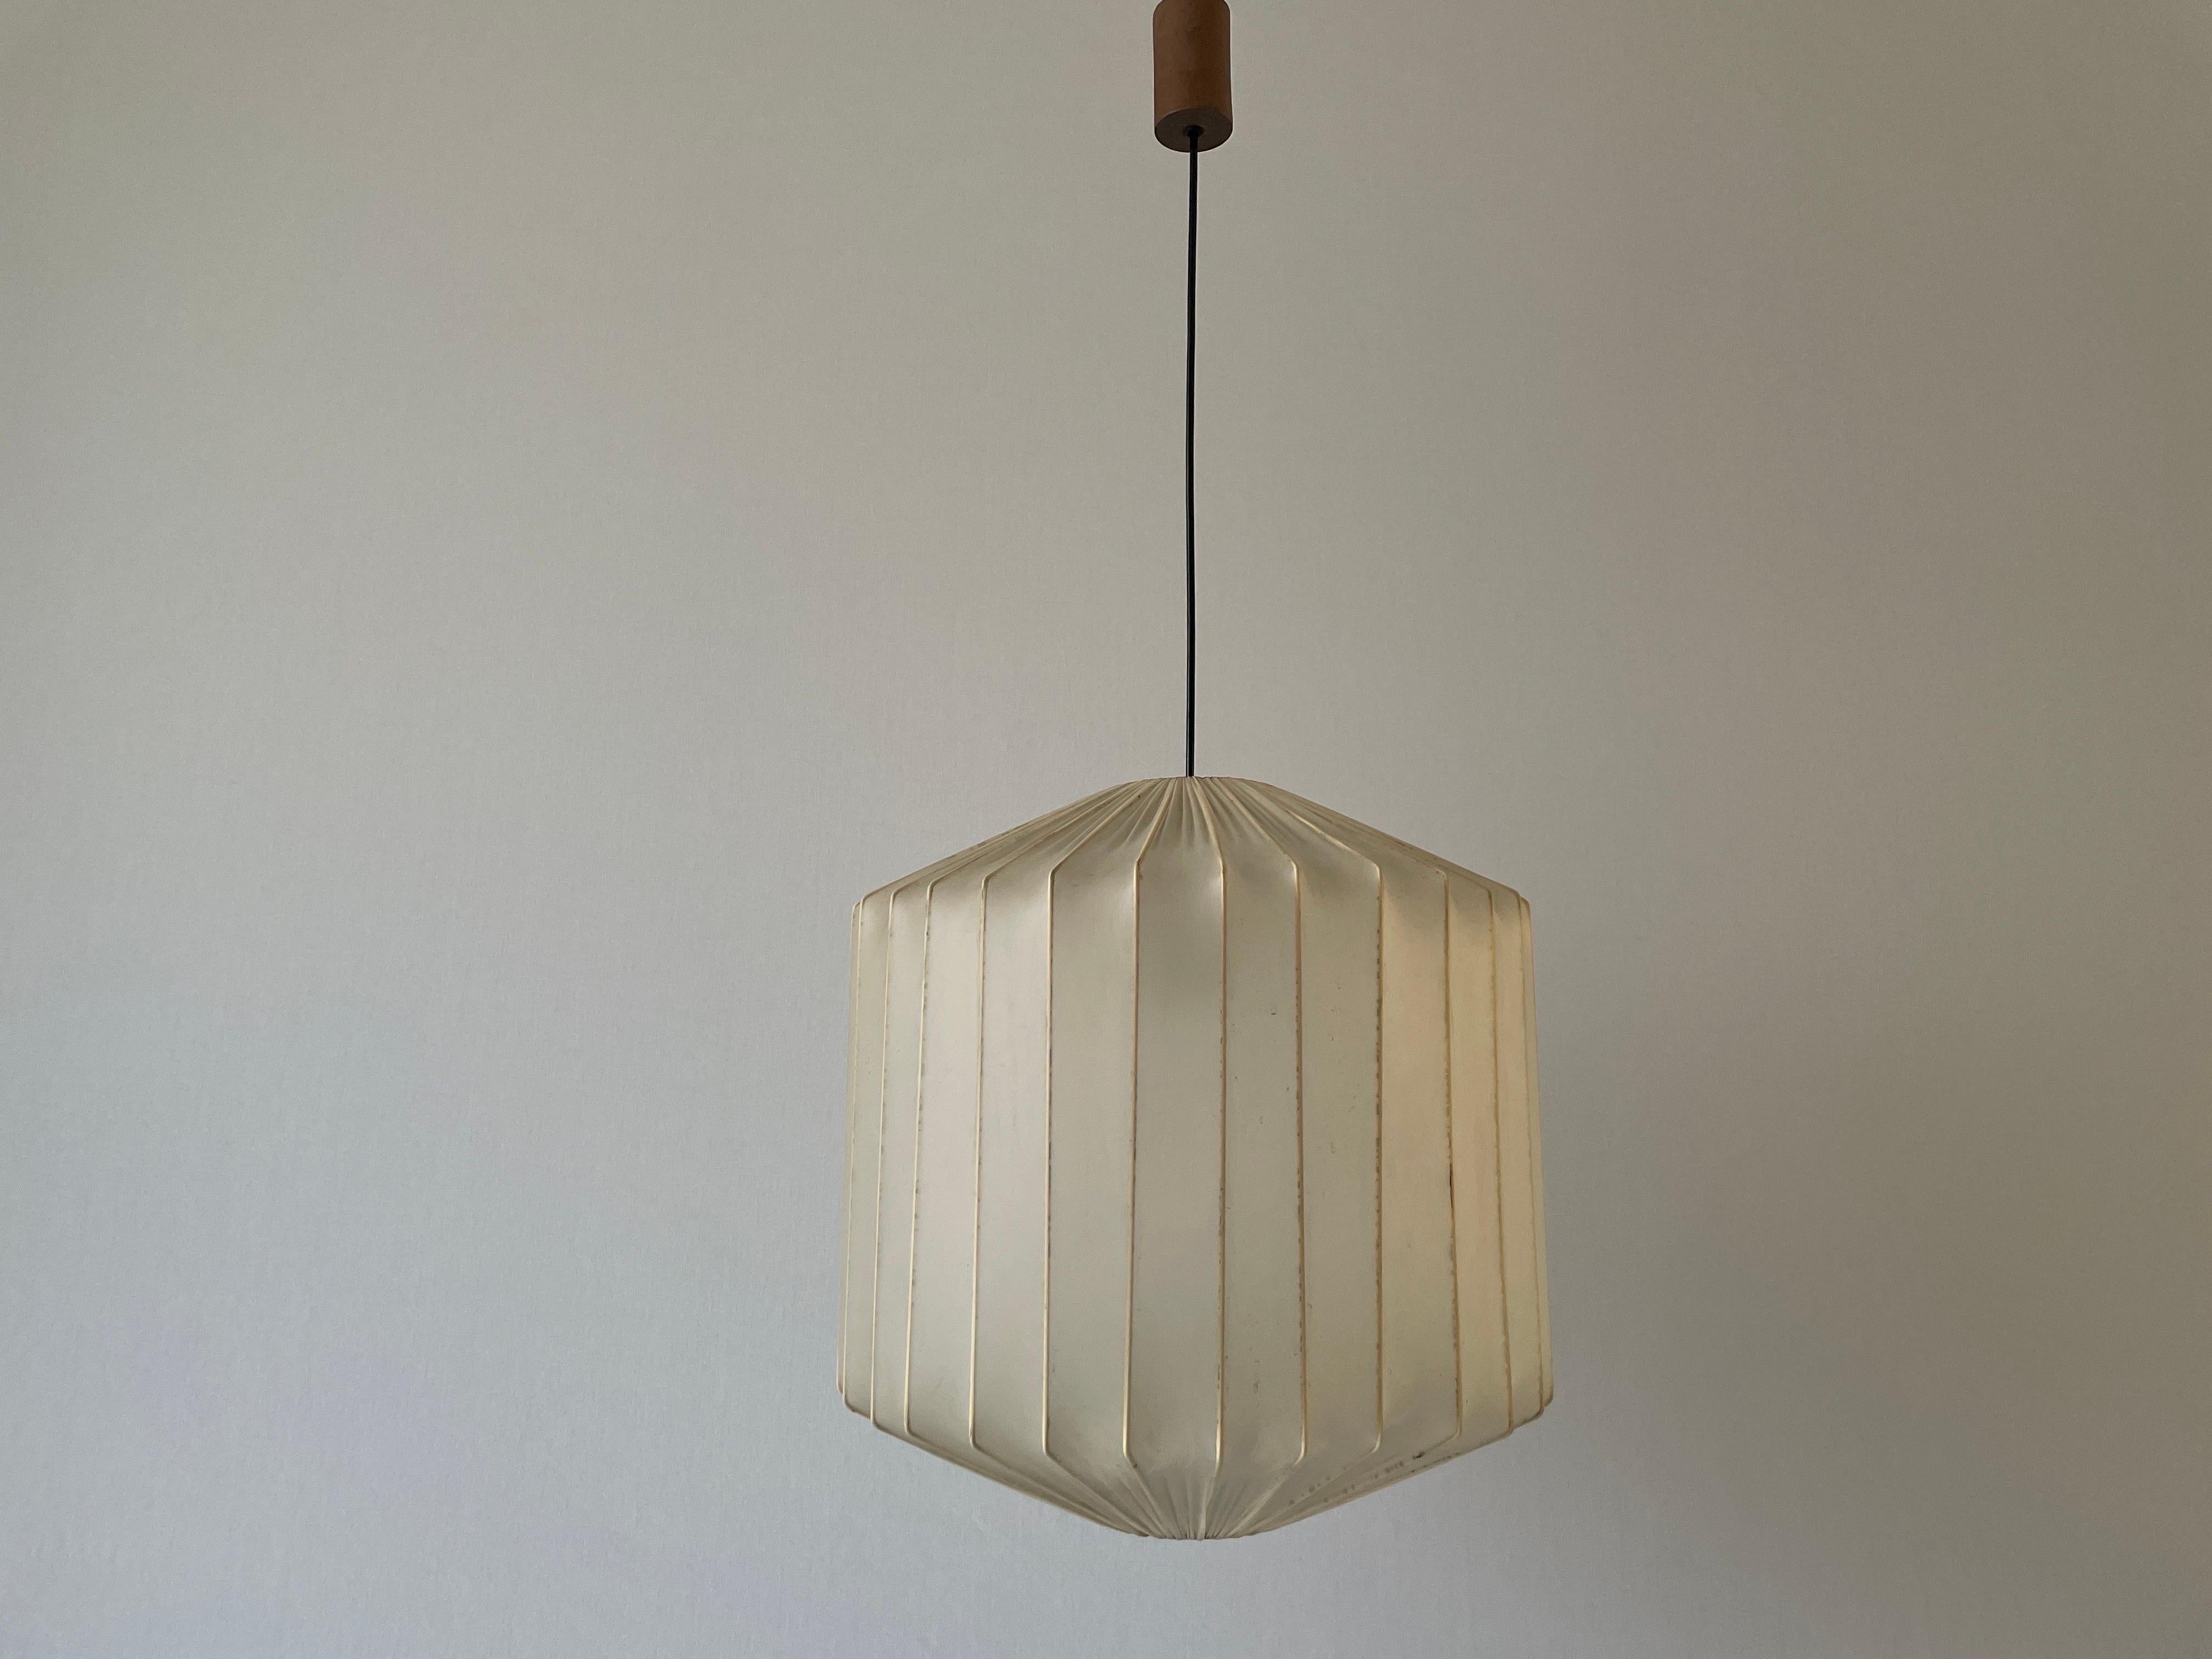 Satin Silk Fabric Ceiling Lamp in Cocoon Shape, 1960s, Italy For Sale 3